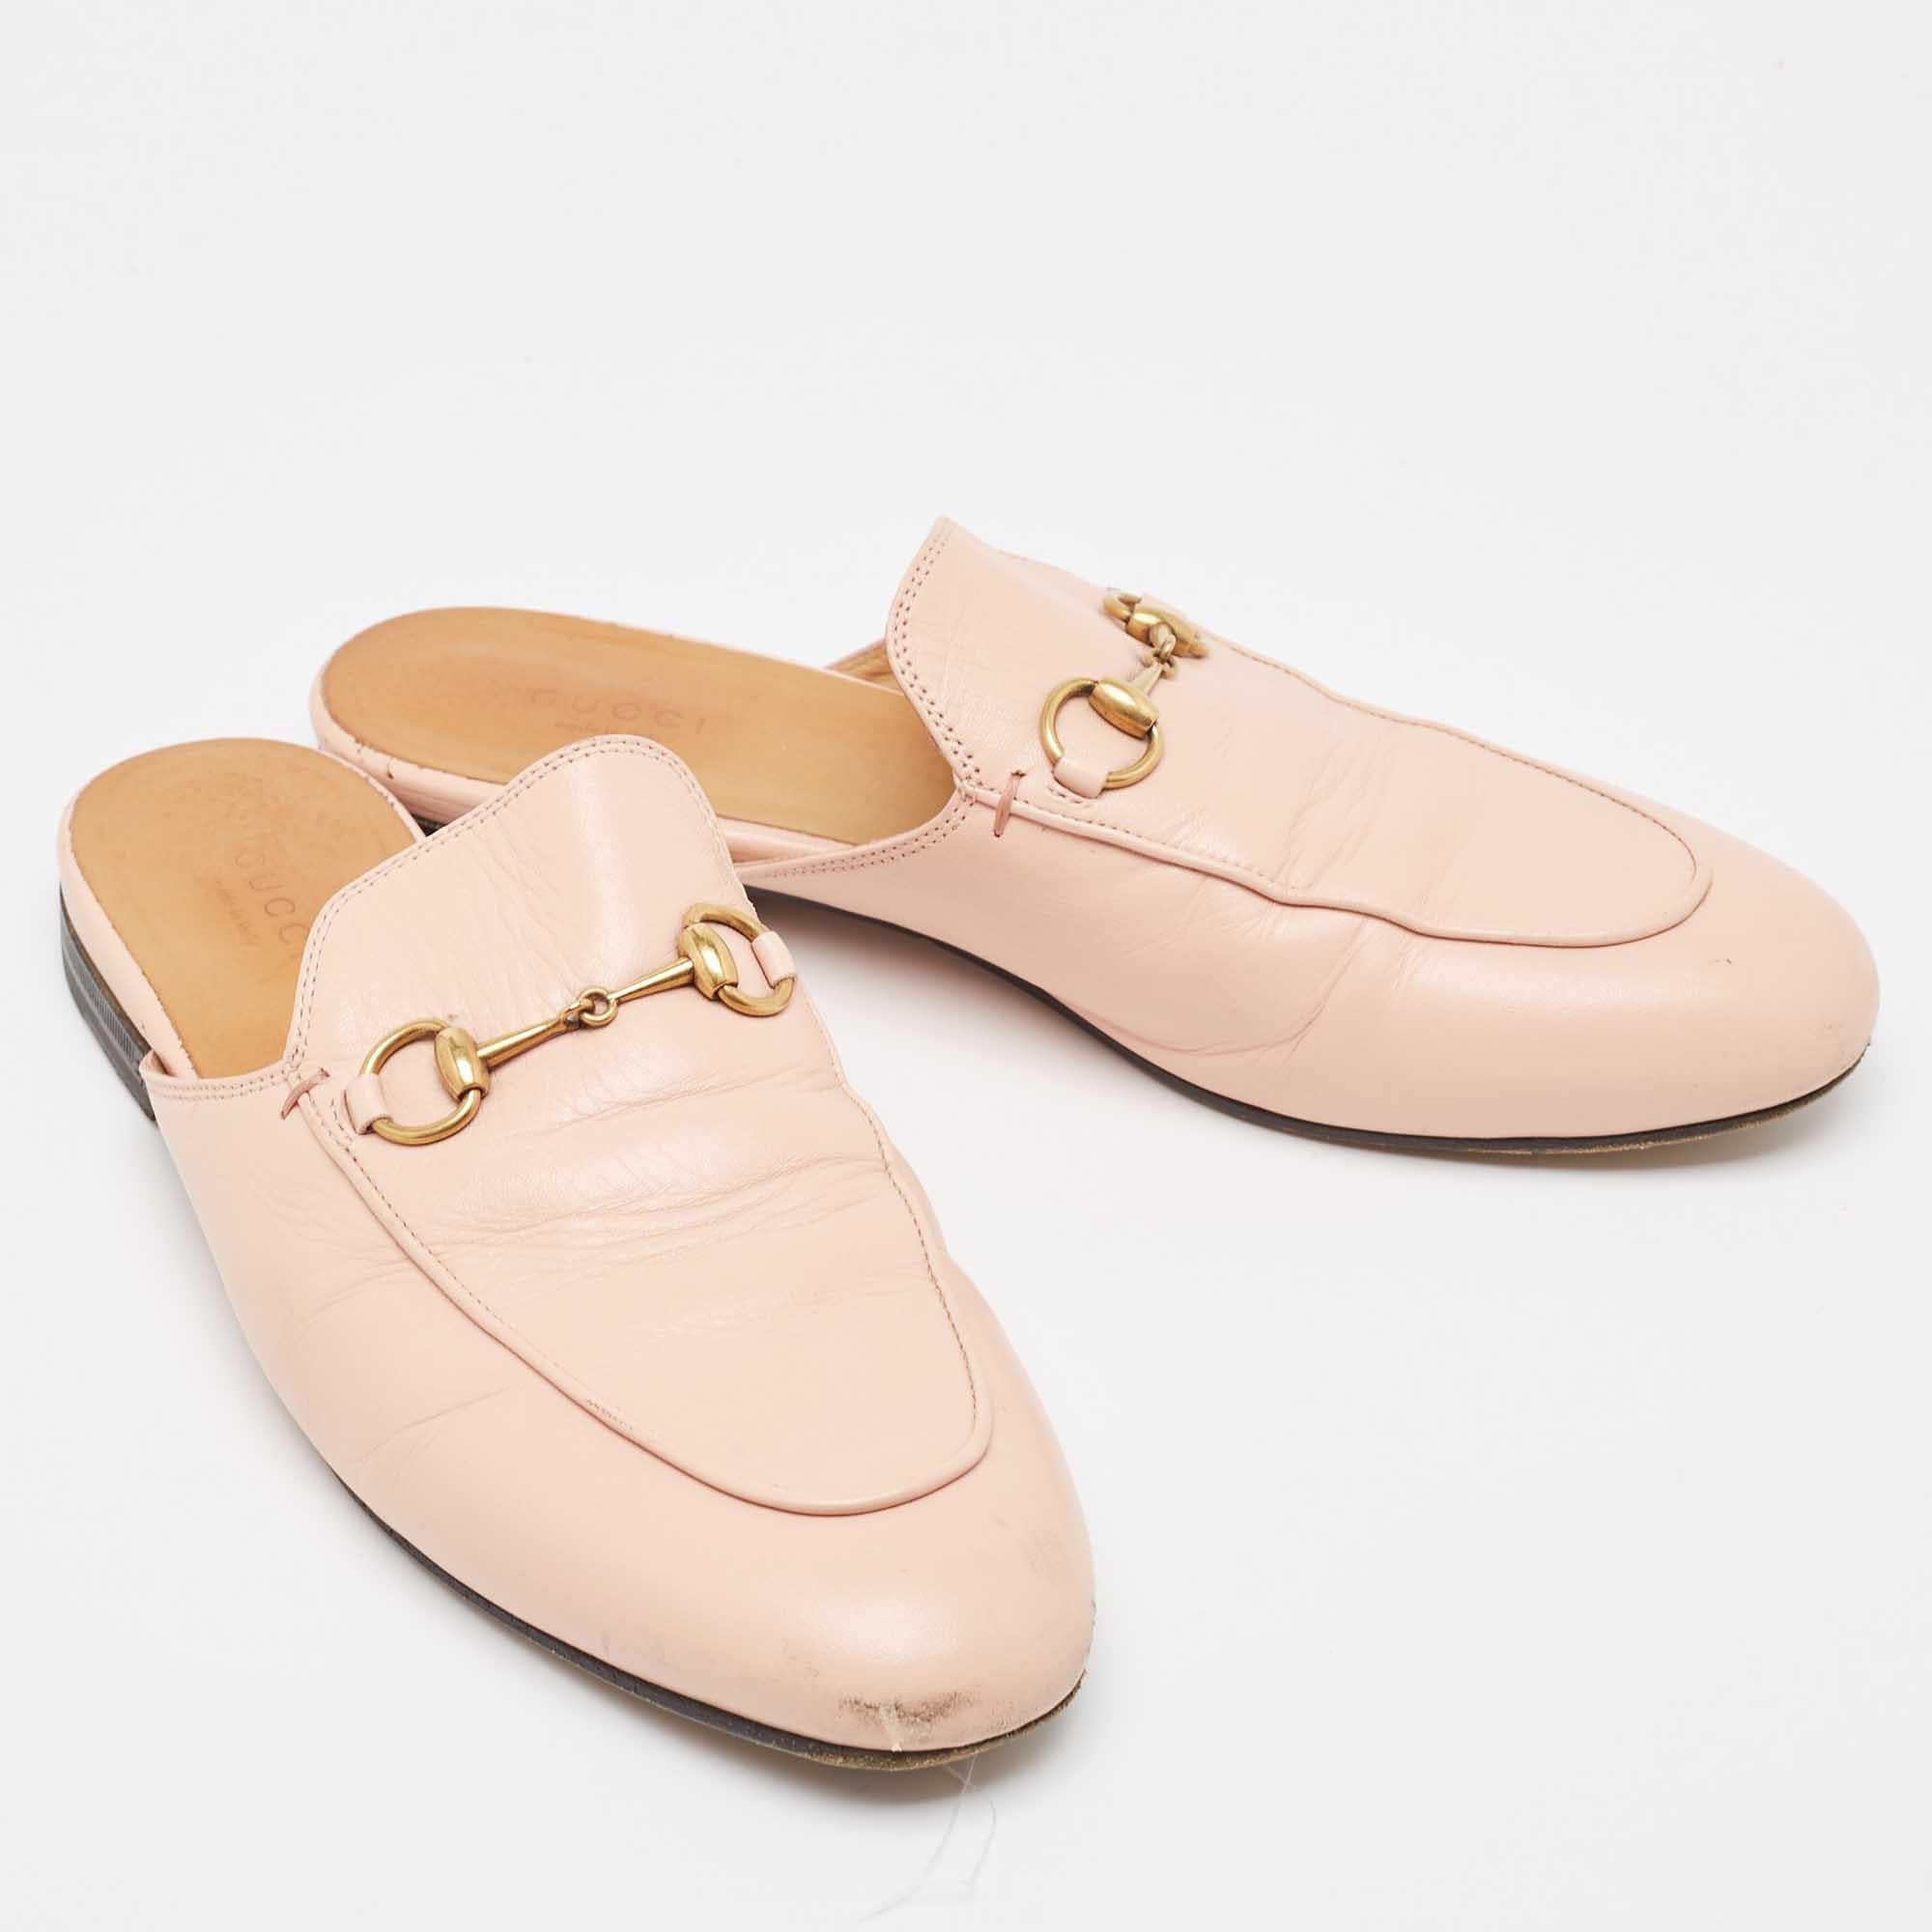 Gucci Pink Leather Princetown Flat Mules Size 39 In Good Condition For Sale In Dubai, Al Qouz 2